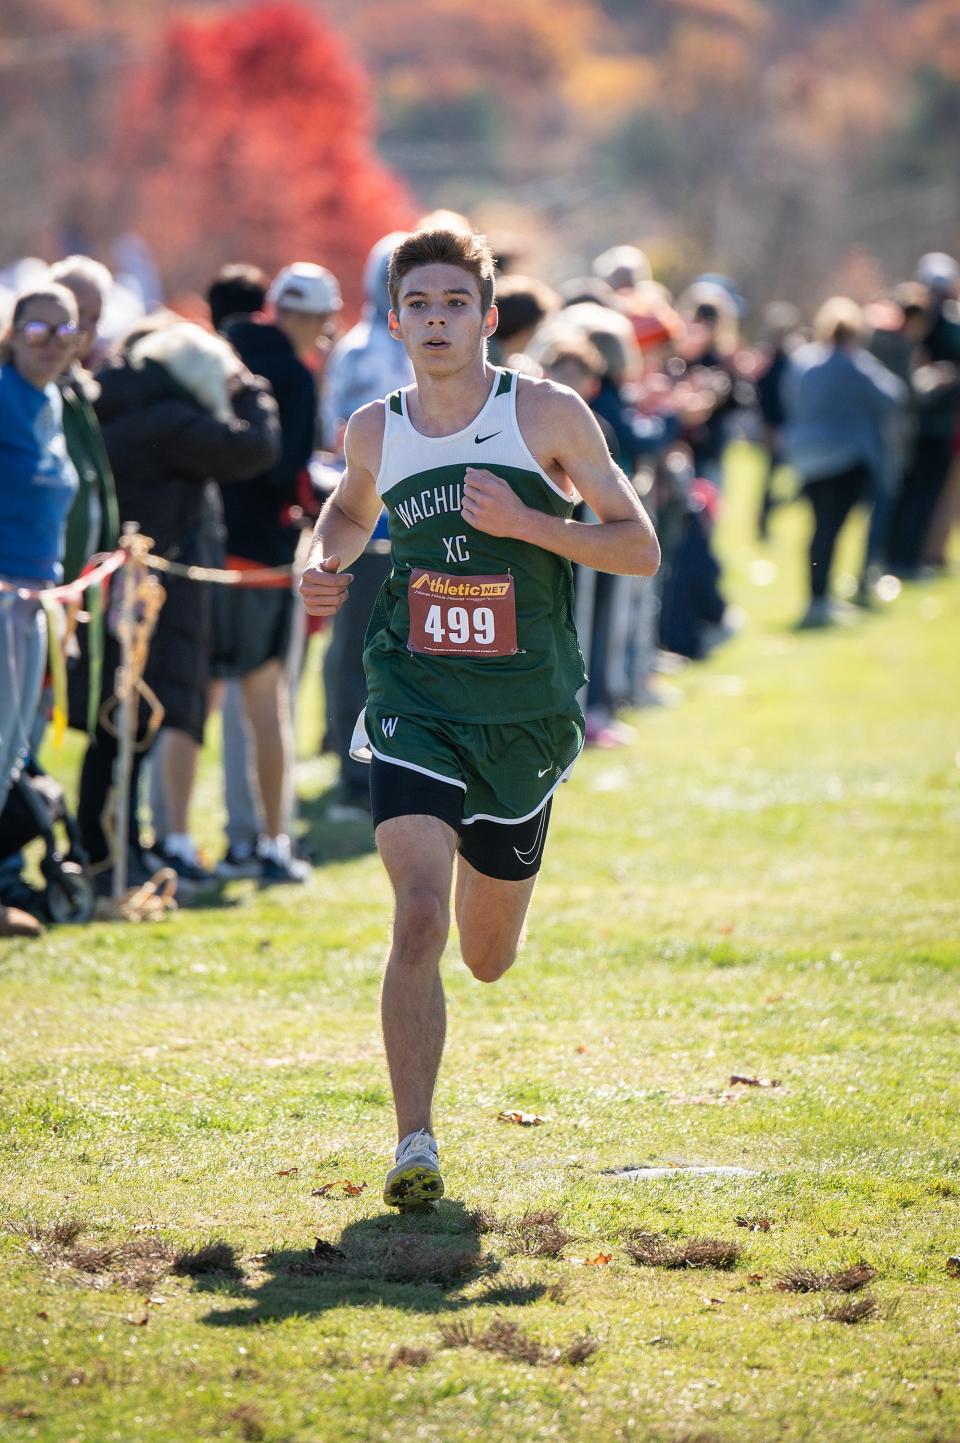 Wachusett's Dylan Brenn finishes first in the Division 1 boys' race at the Central Mass. XC Championships at Gardner Municipal Golf Course.